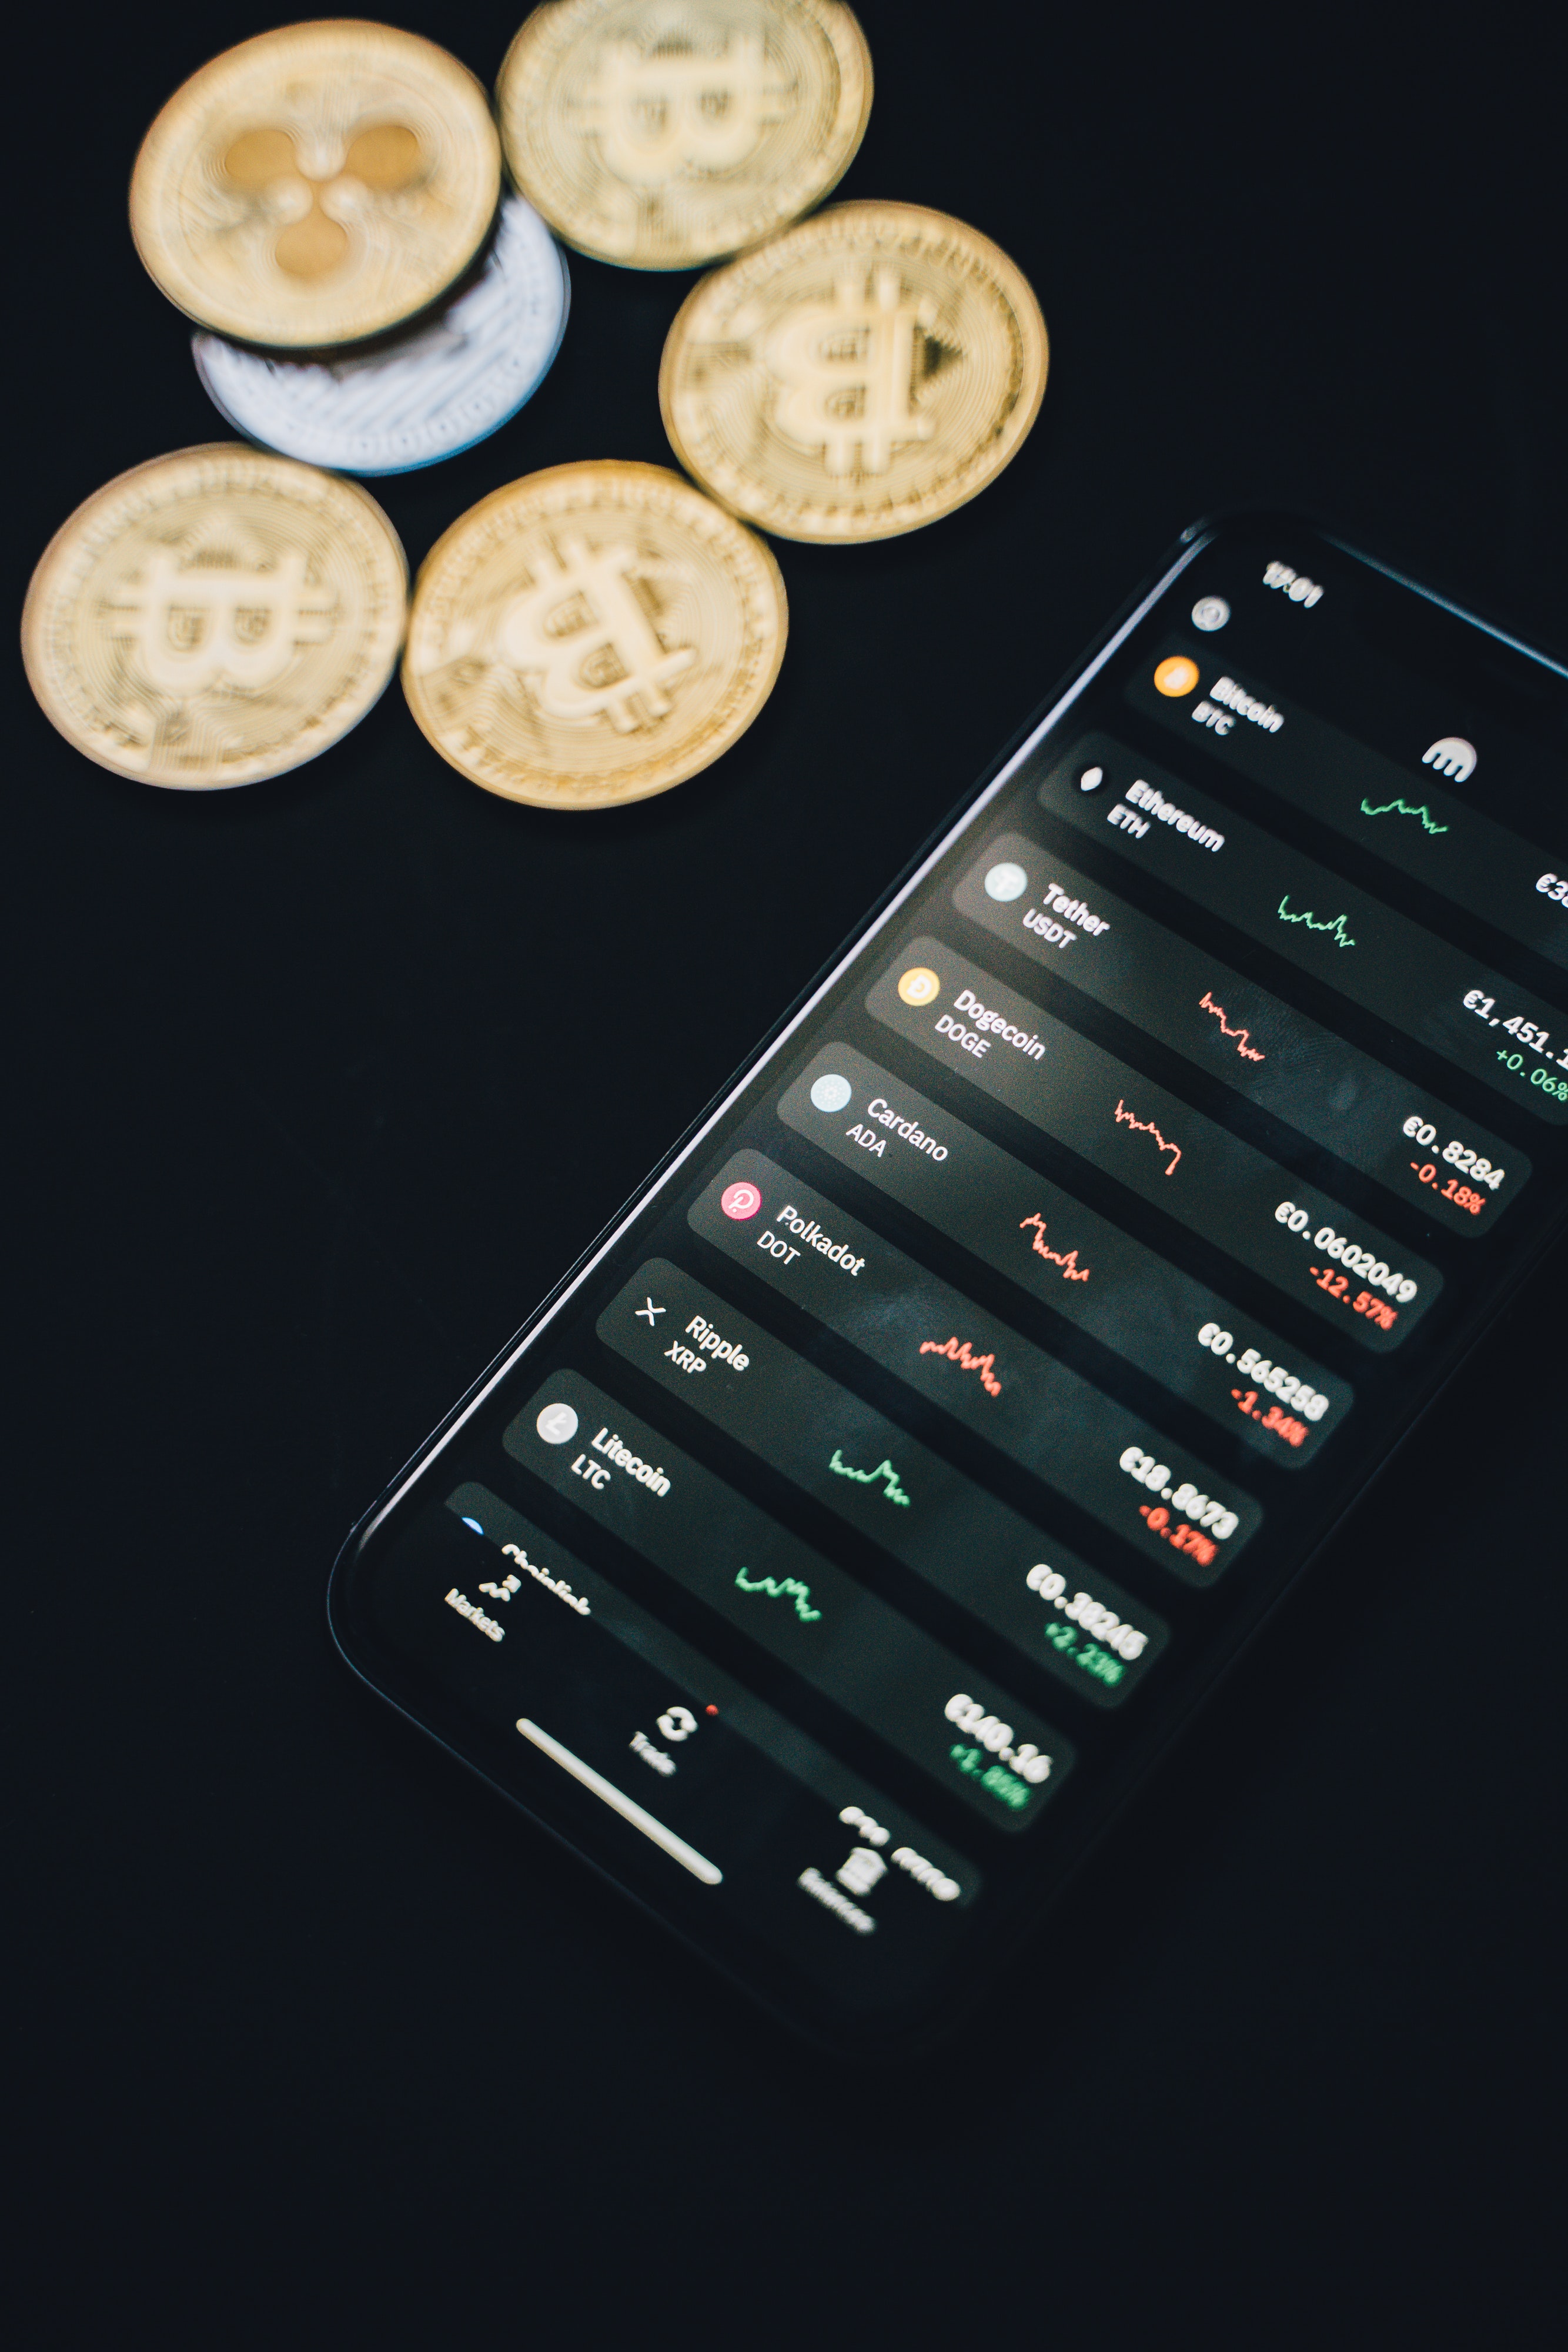 DeFinance: The Best Cryptocurrency Tracker and Tracking App